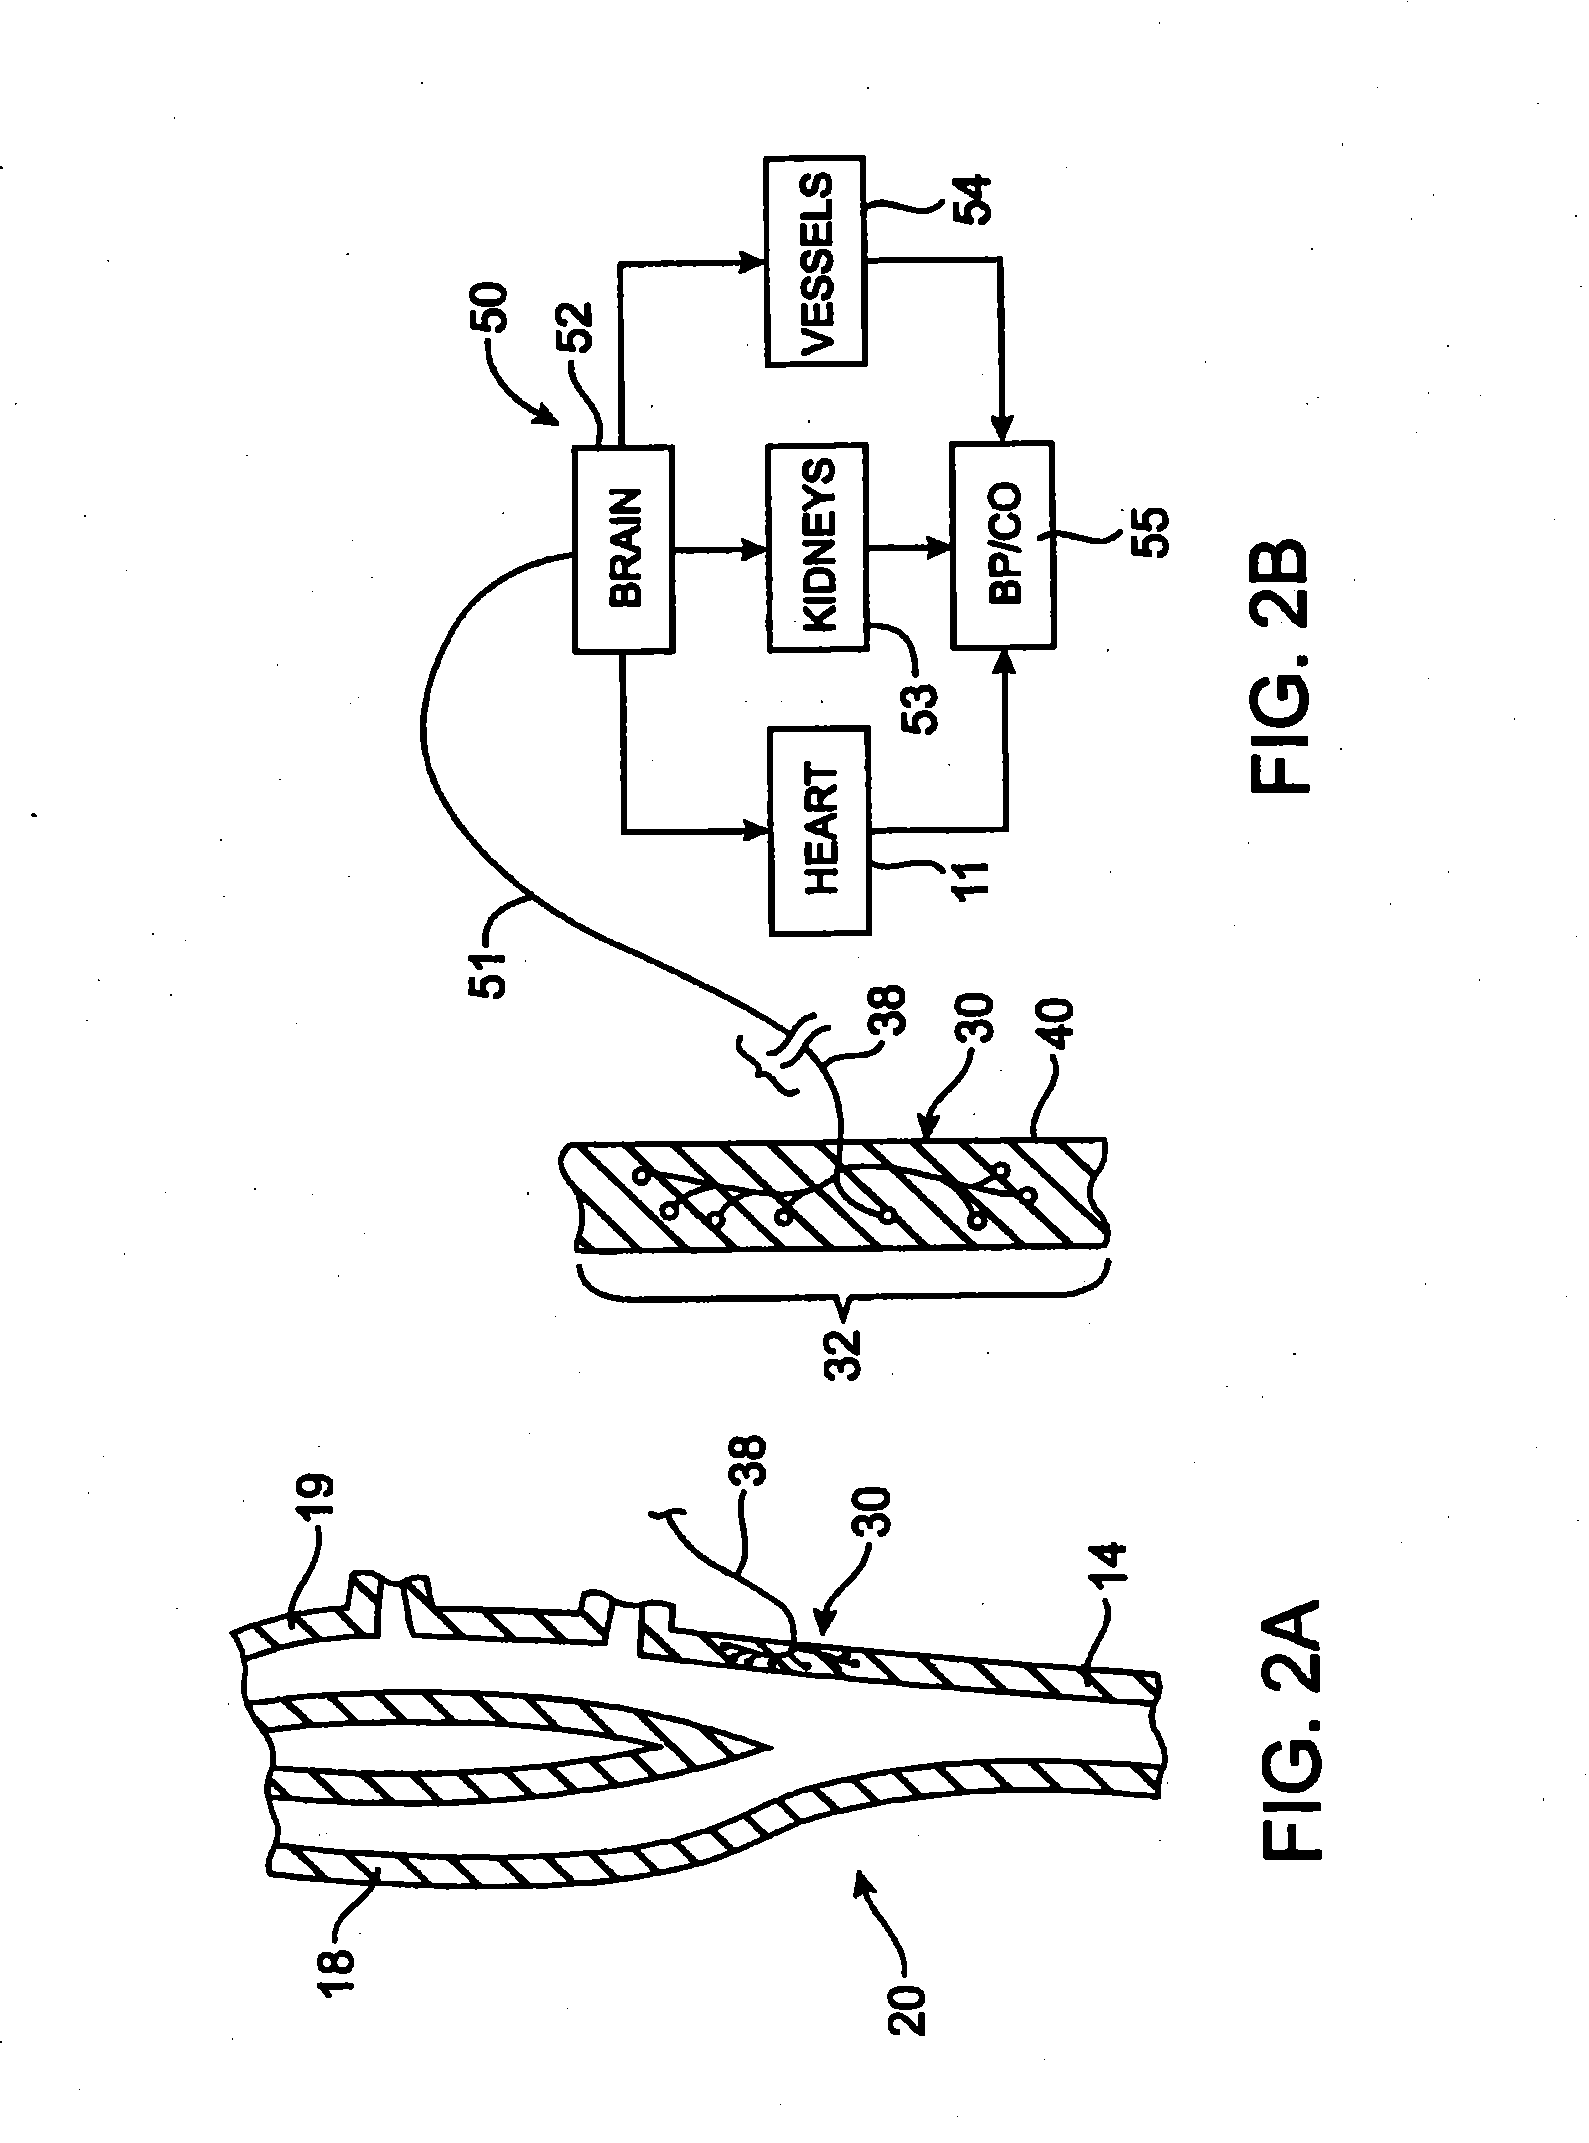 Devices and methods for cardiovascular reflex control via coupled electrodes